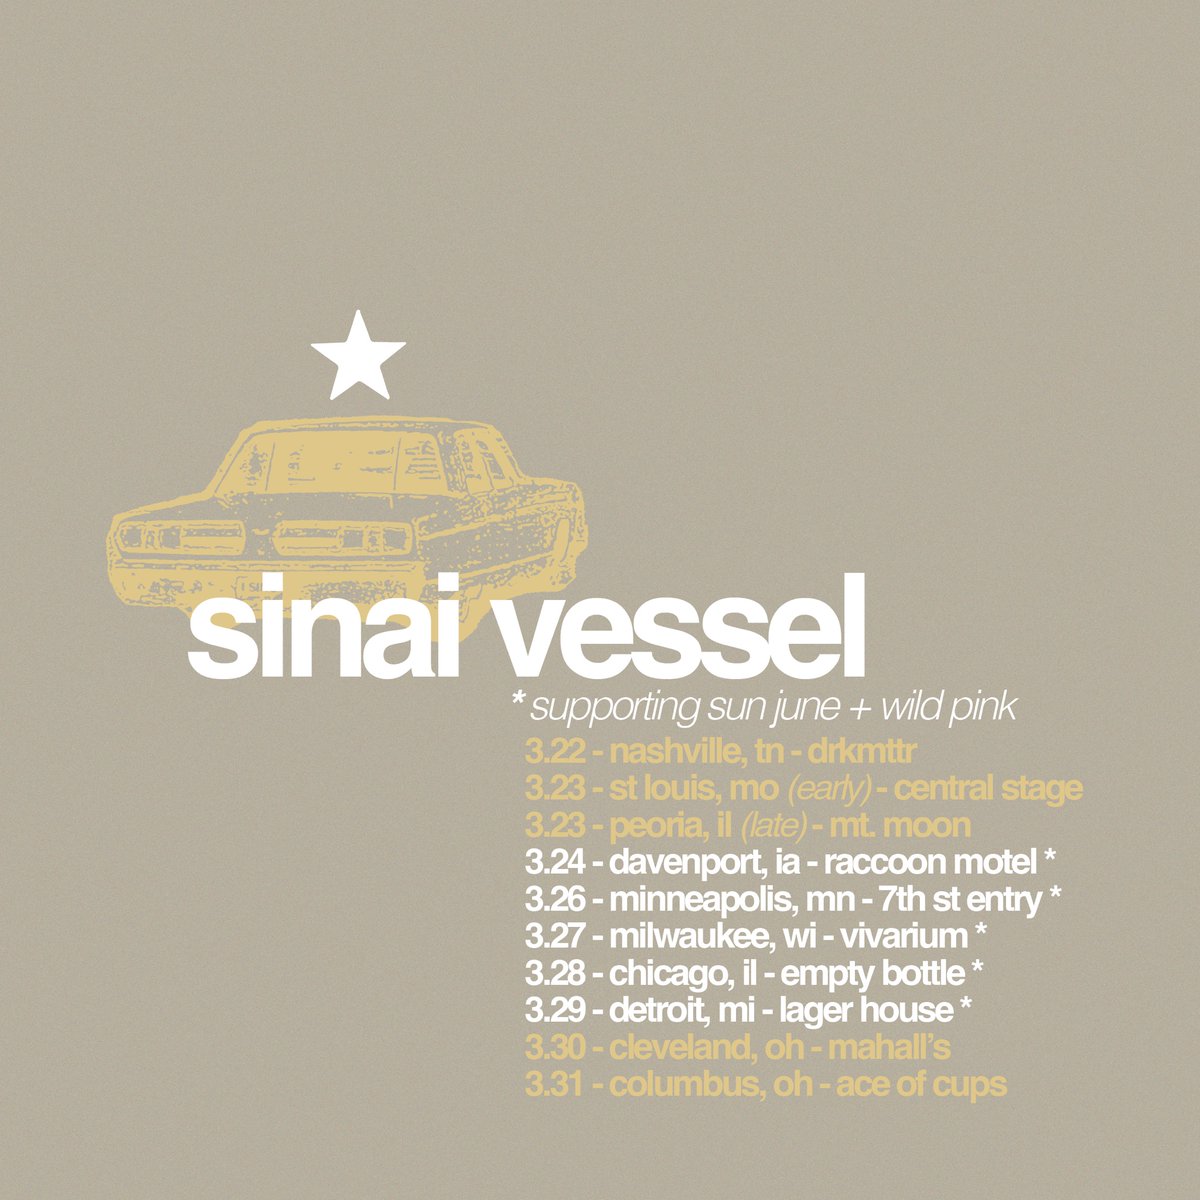 nashville st louis peoria davenport minneapolis milwaukee chicago detroit cleveland columbus stand at attention. we are coming to you tix: linktr.ee/sinaivessel